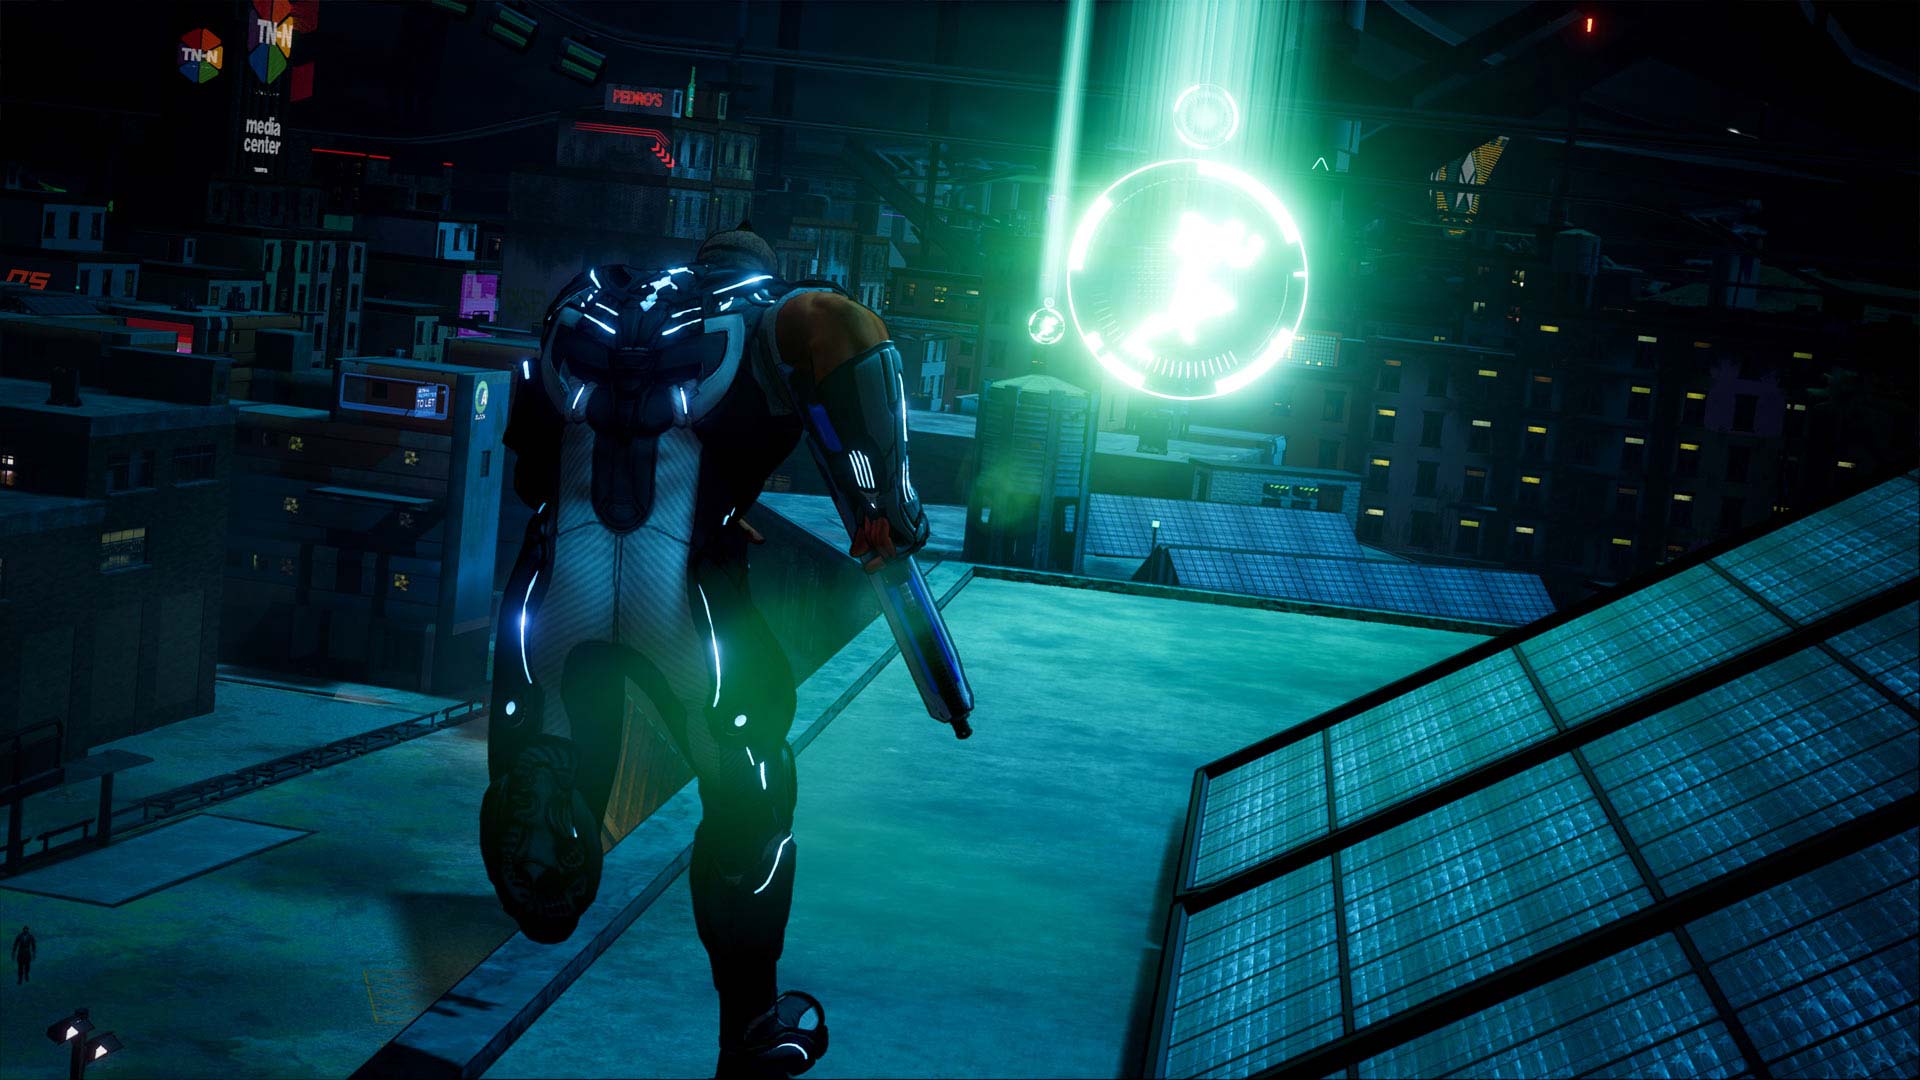 The Continued Disappointment of Crackdown 3